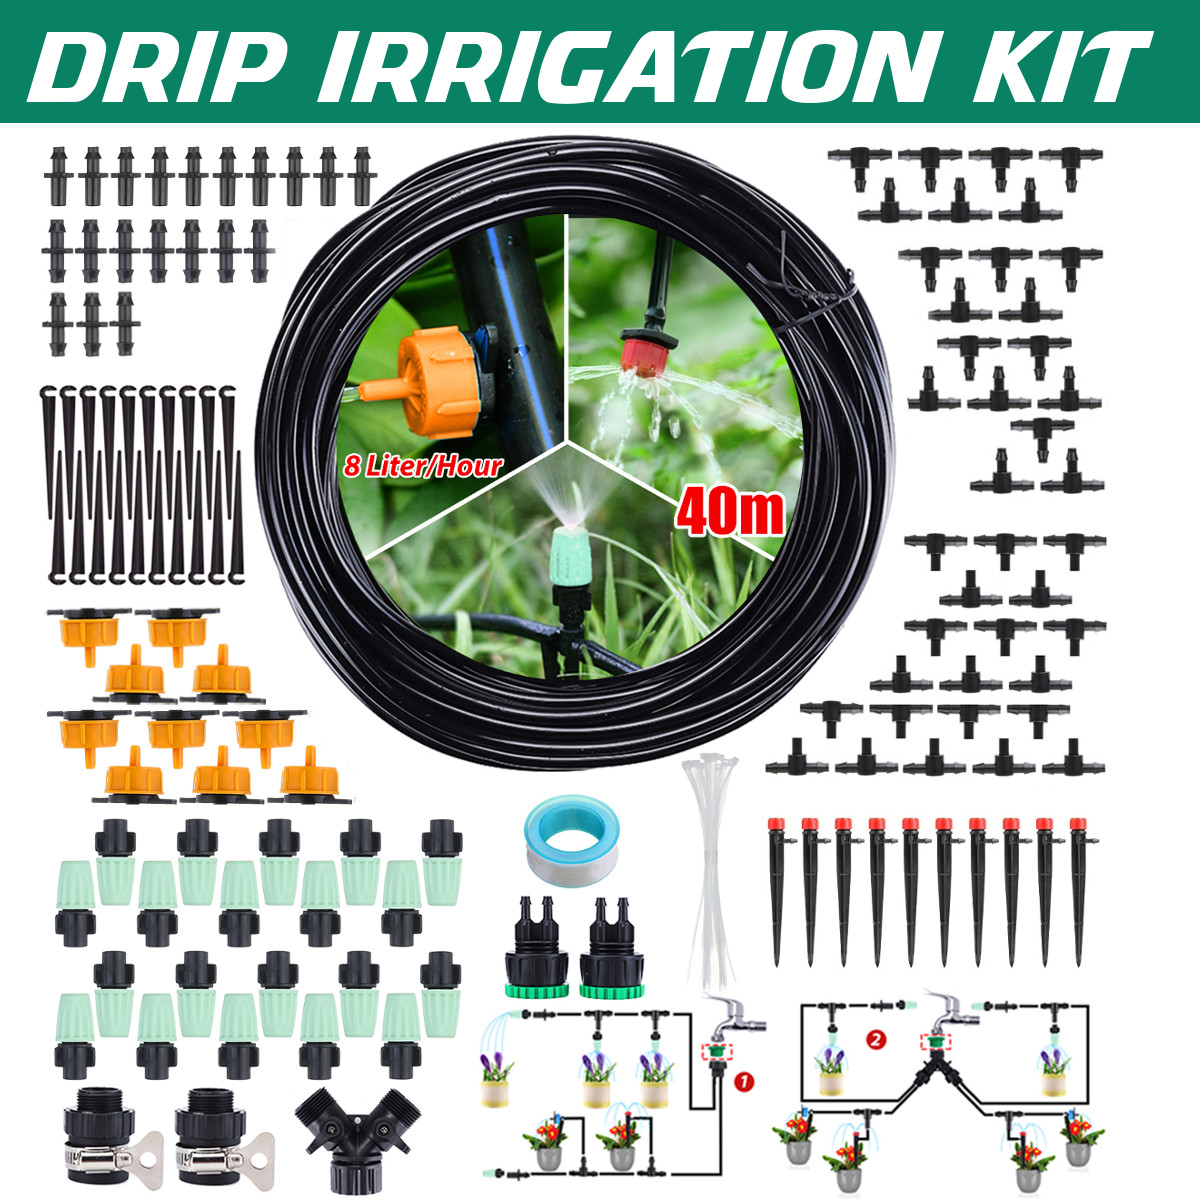 CAVEEN-131Ft40M-Automatic-Drip-Irrigation-DIY-Garden-Plant-Watering-Kit-Micro-Drip-Irrigation-System-1897661-1